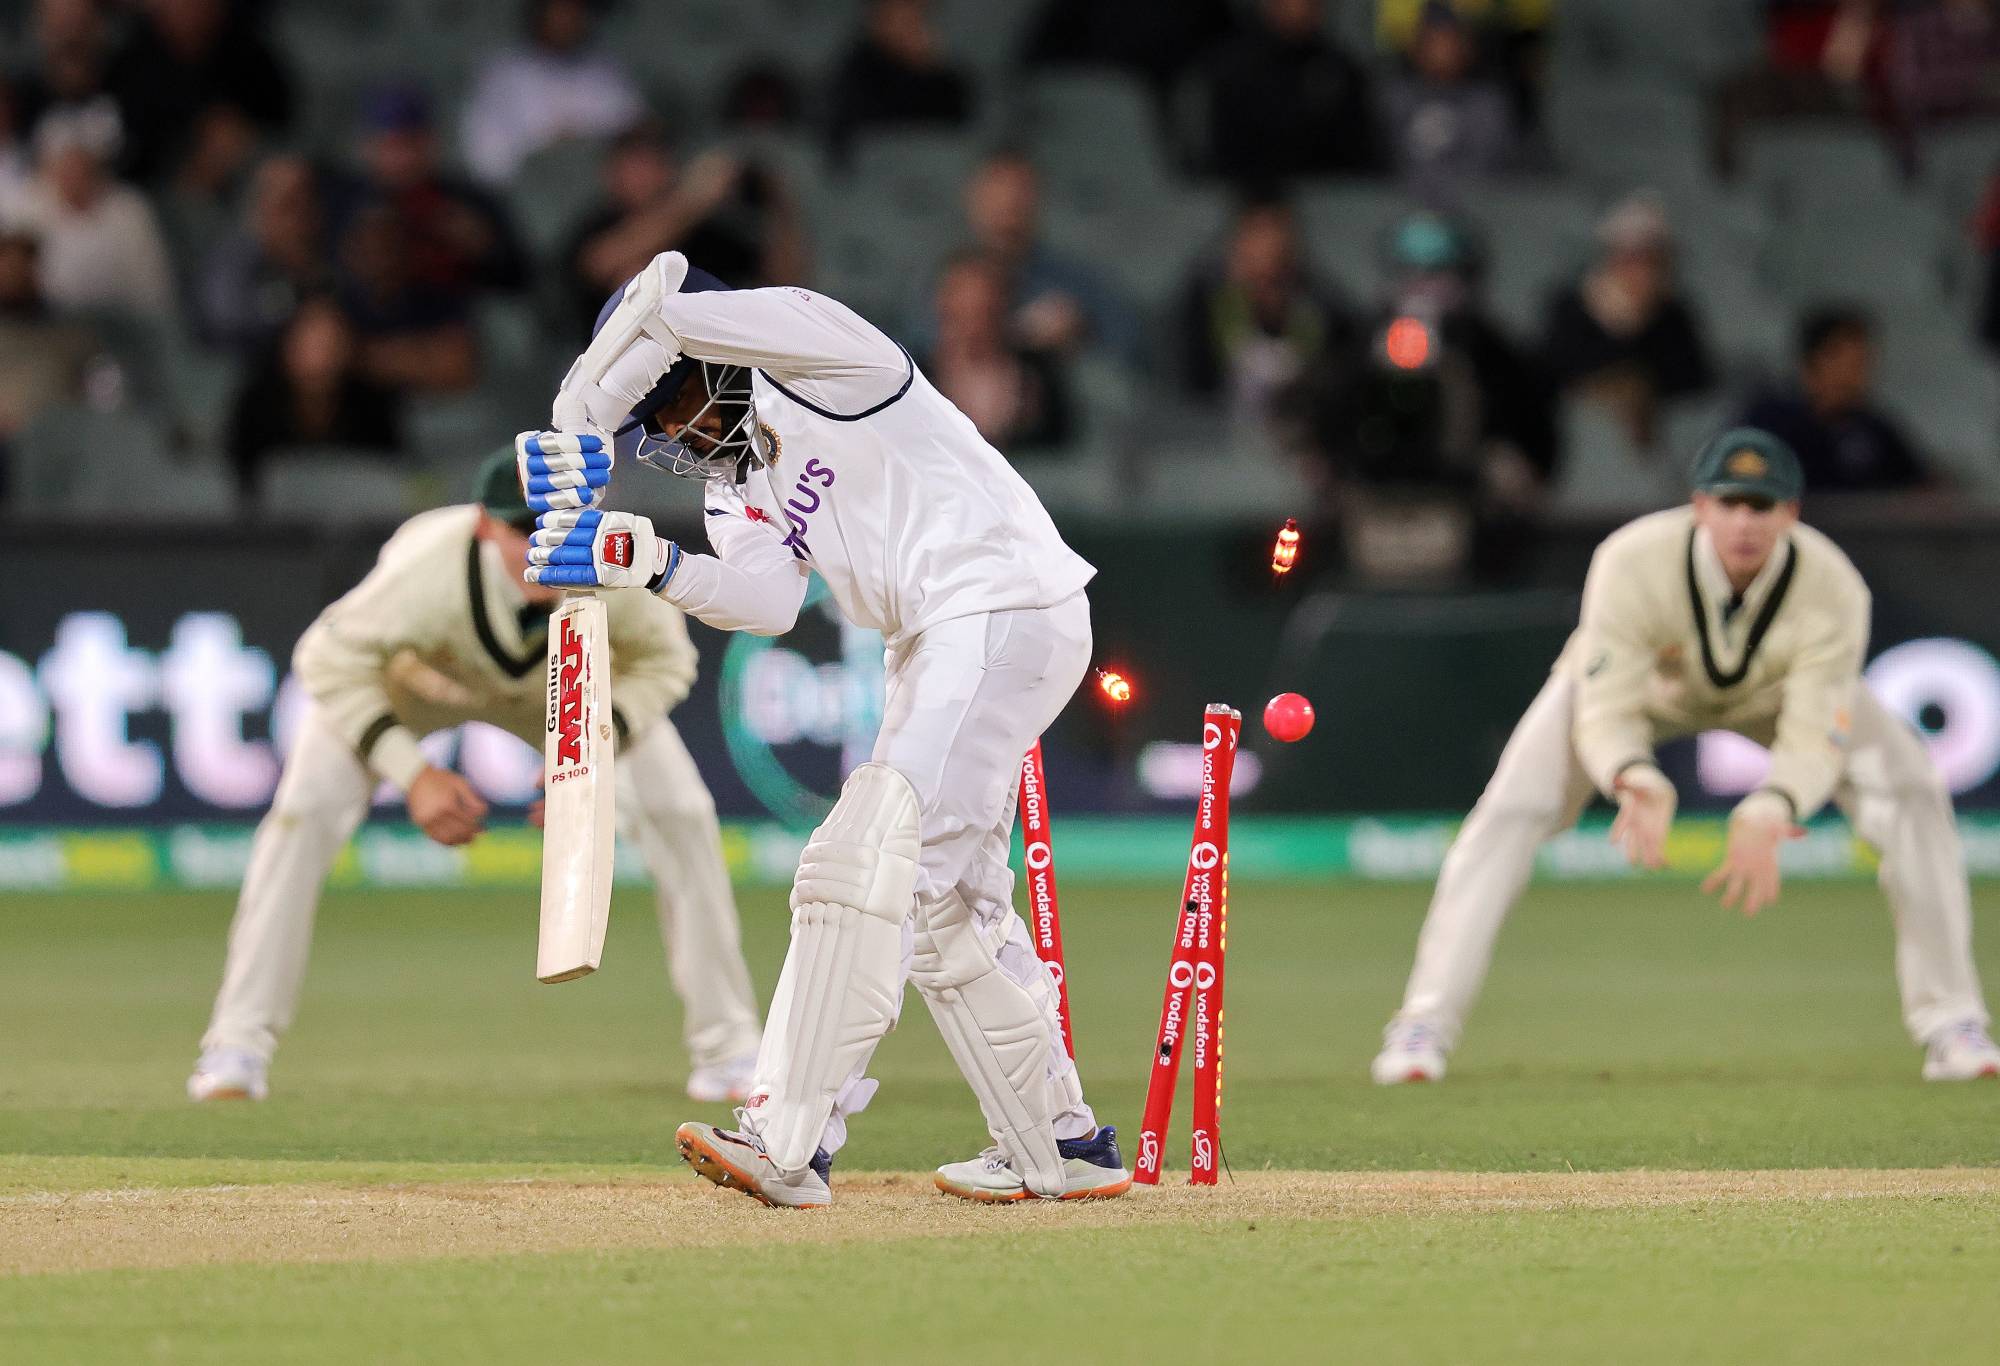 ADELAIDE, AUSTRALIA - DECEMBER 18: Prithvi Shaw of India is bowled by Pat Cummins of Australia during day two of the First Test match between Australia and India at Adelaide Oval on December 18, 2020 in Adelaide, Australia. (Photo by Daniel Kalisz - CA/Cricket Australia via Getty Images)